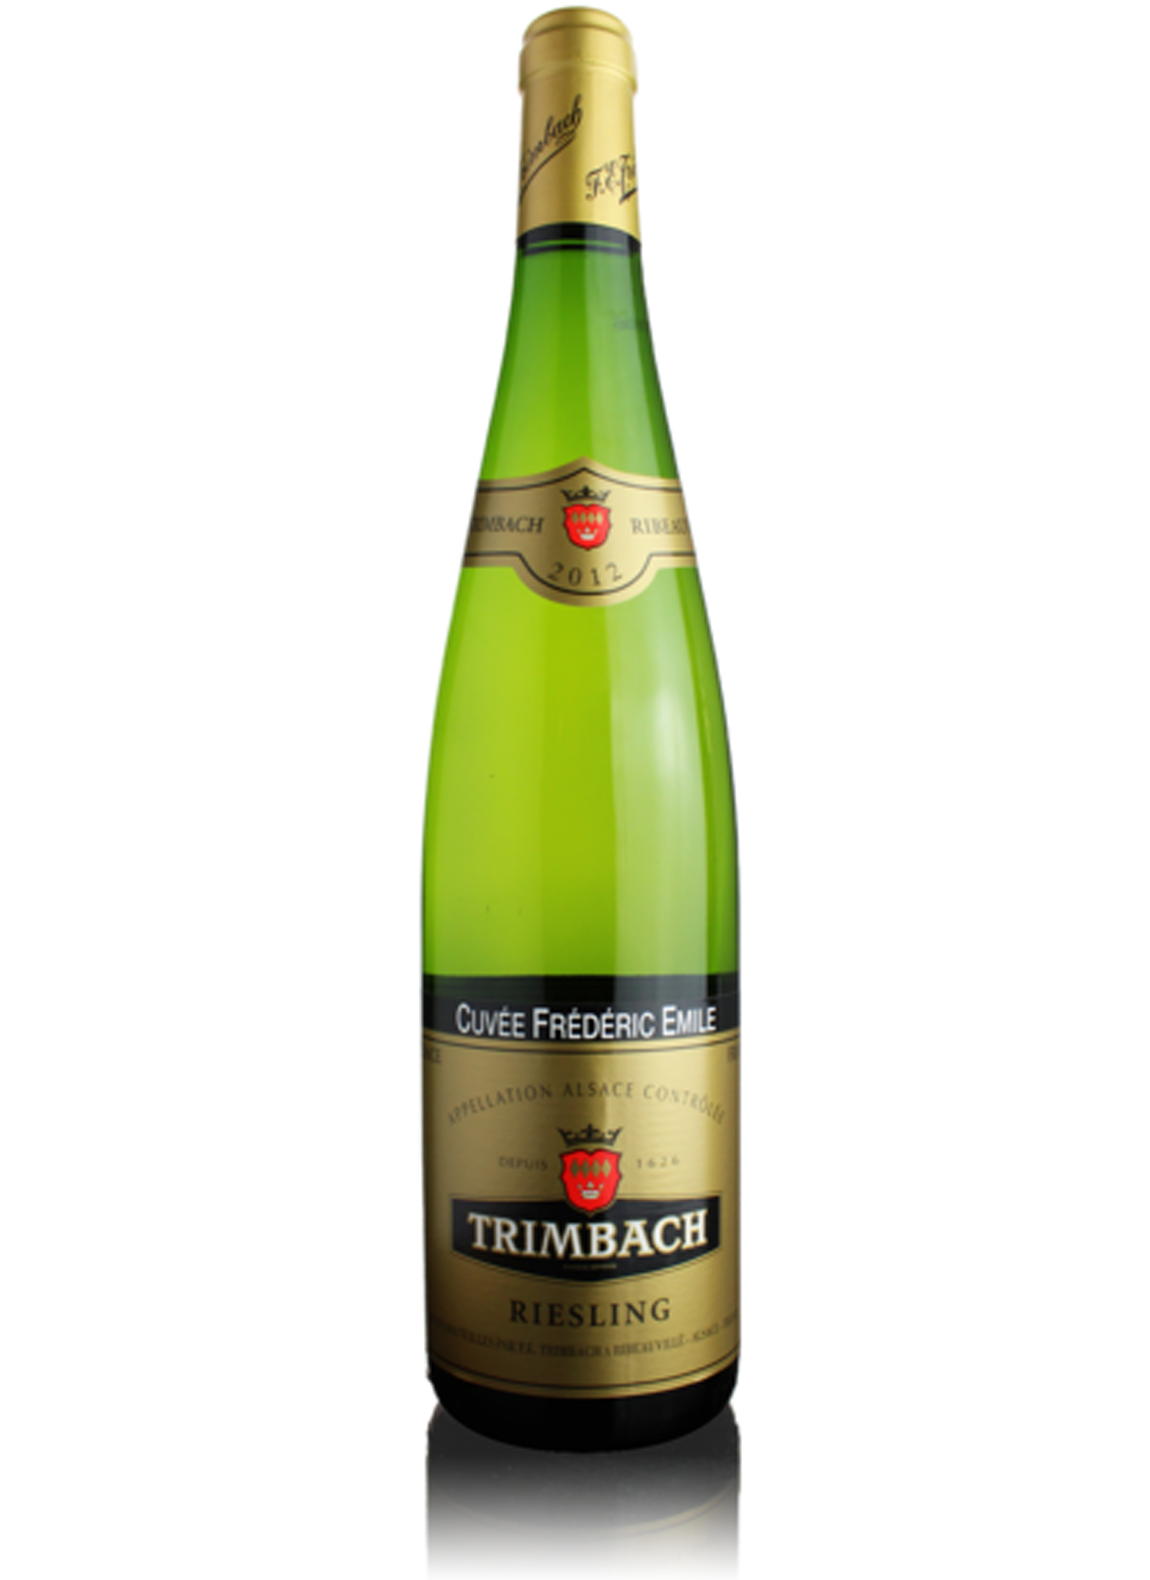 Trimbach Riesling Frederic Emile 2016